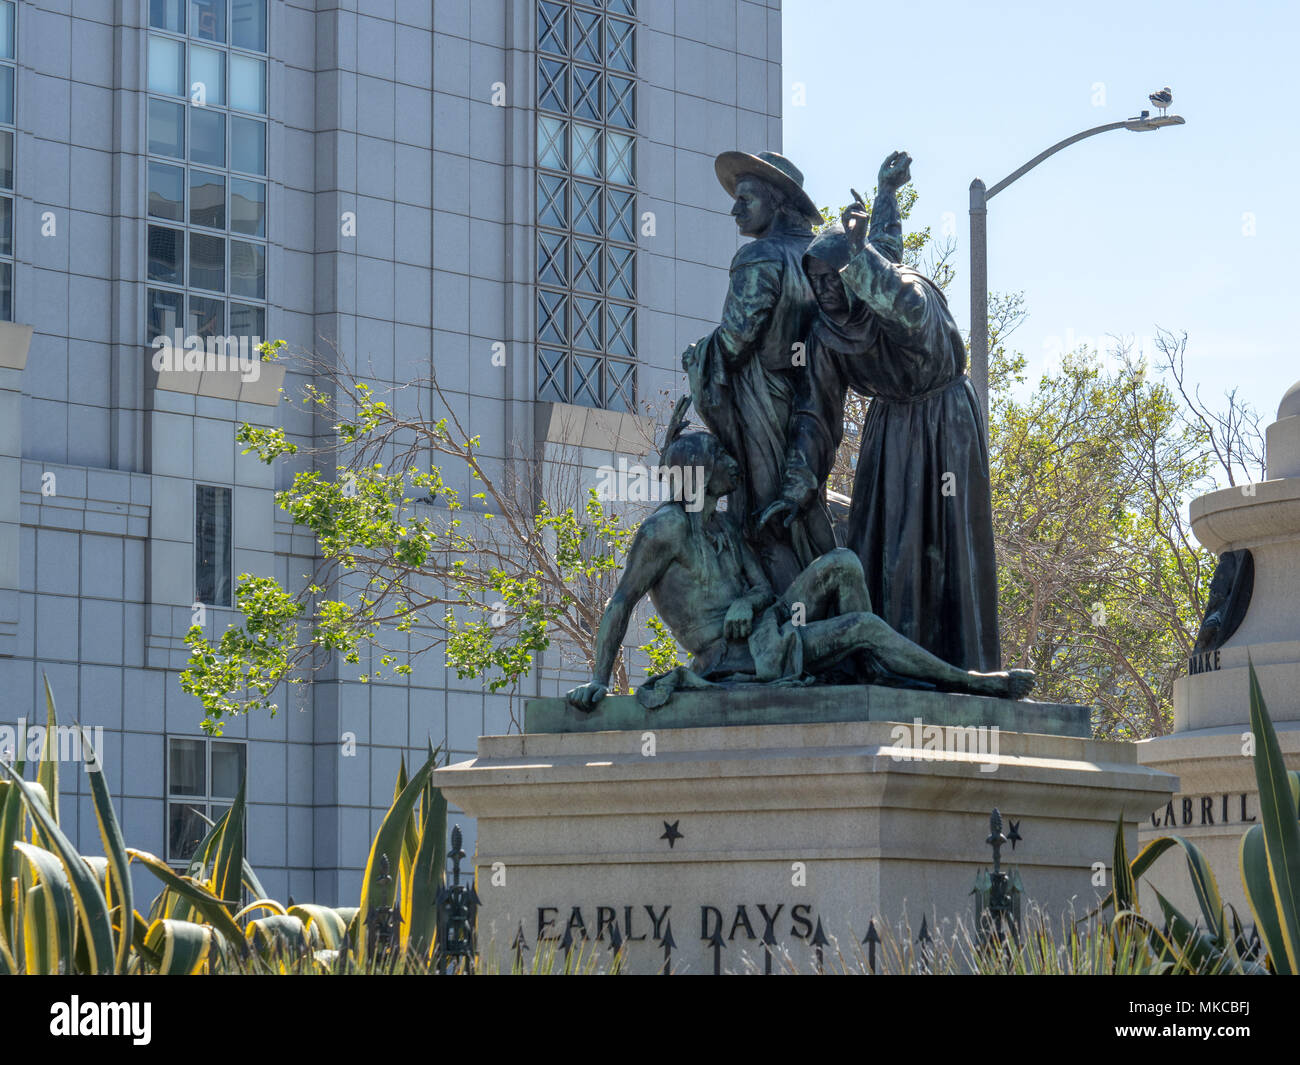 SAN FRANCISCO, CA – APRIL 22, 2018: Controversial “Early Days” statue in Civic Center area of San Francisco. The statue depicts a Catholic missionary  Stock Photo